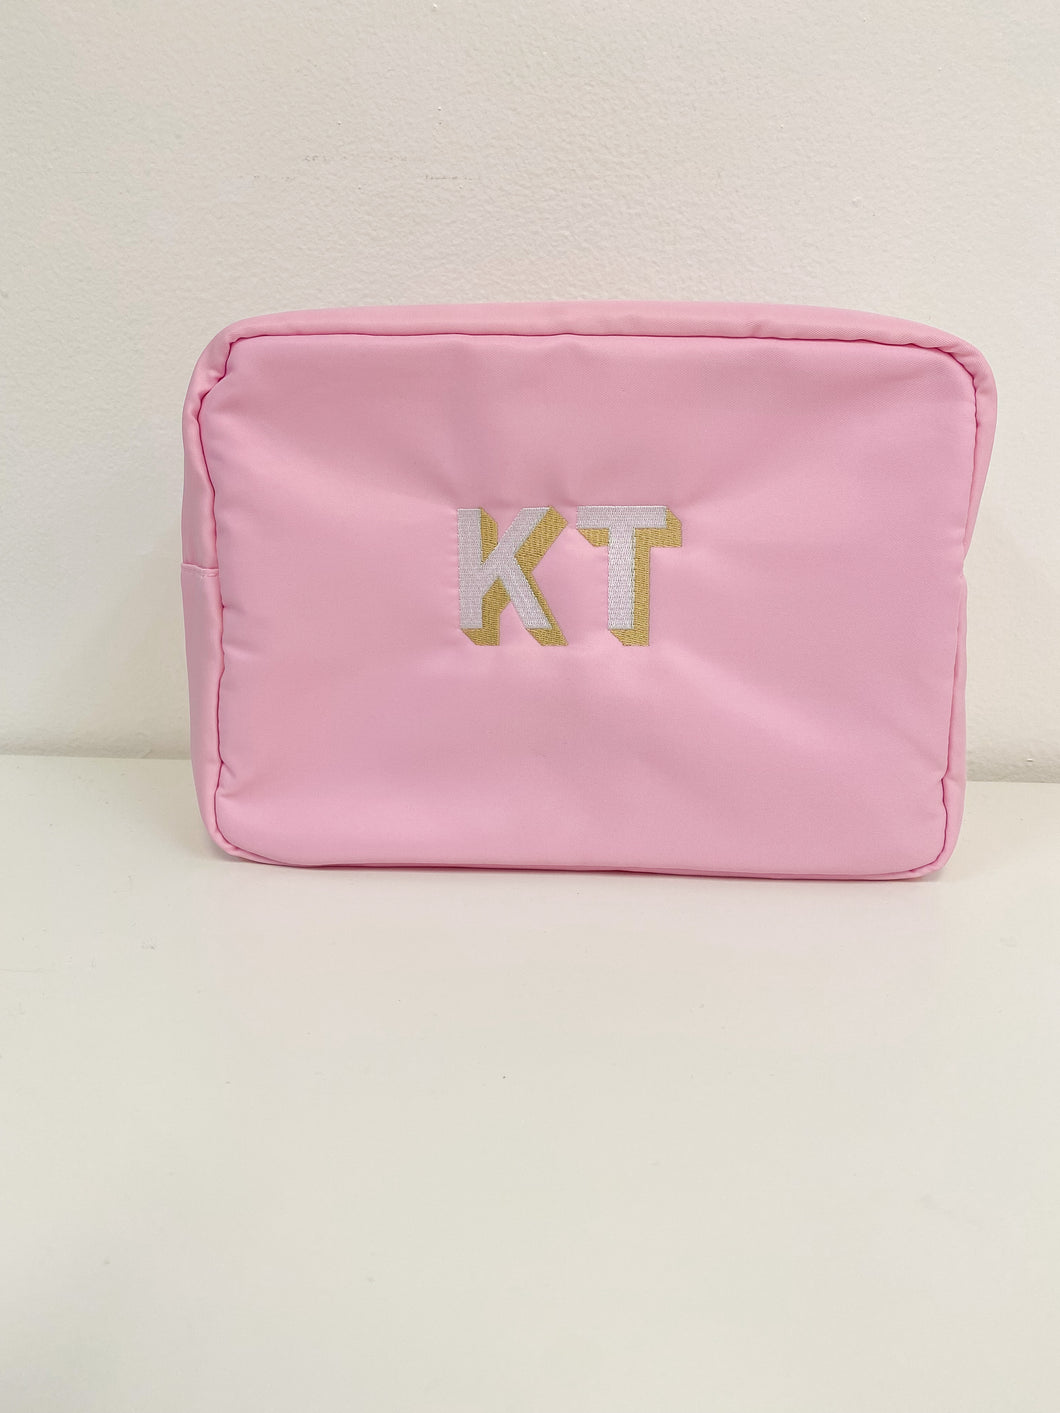 KT XL Large Cosmetic Bag